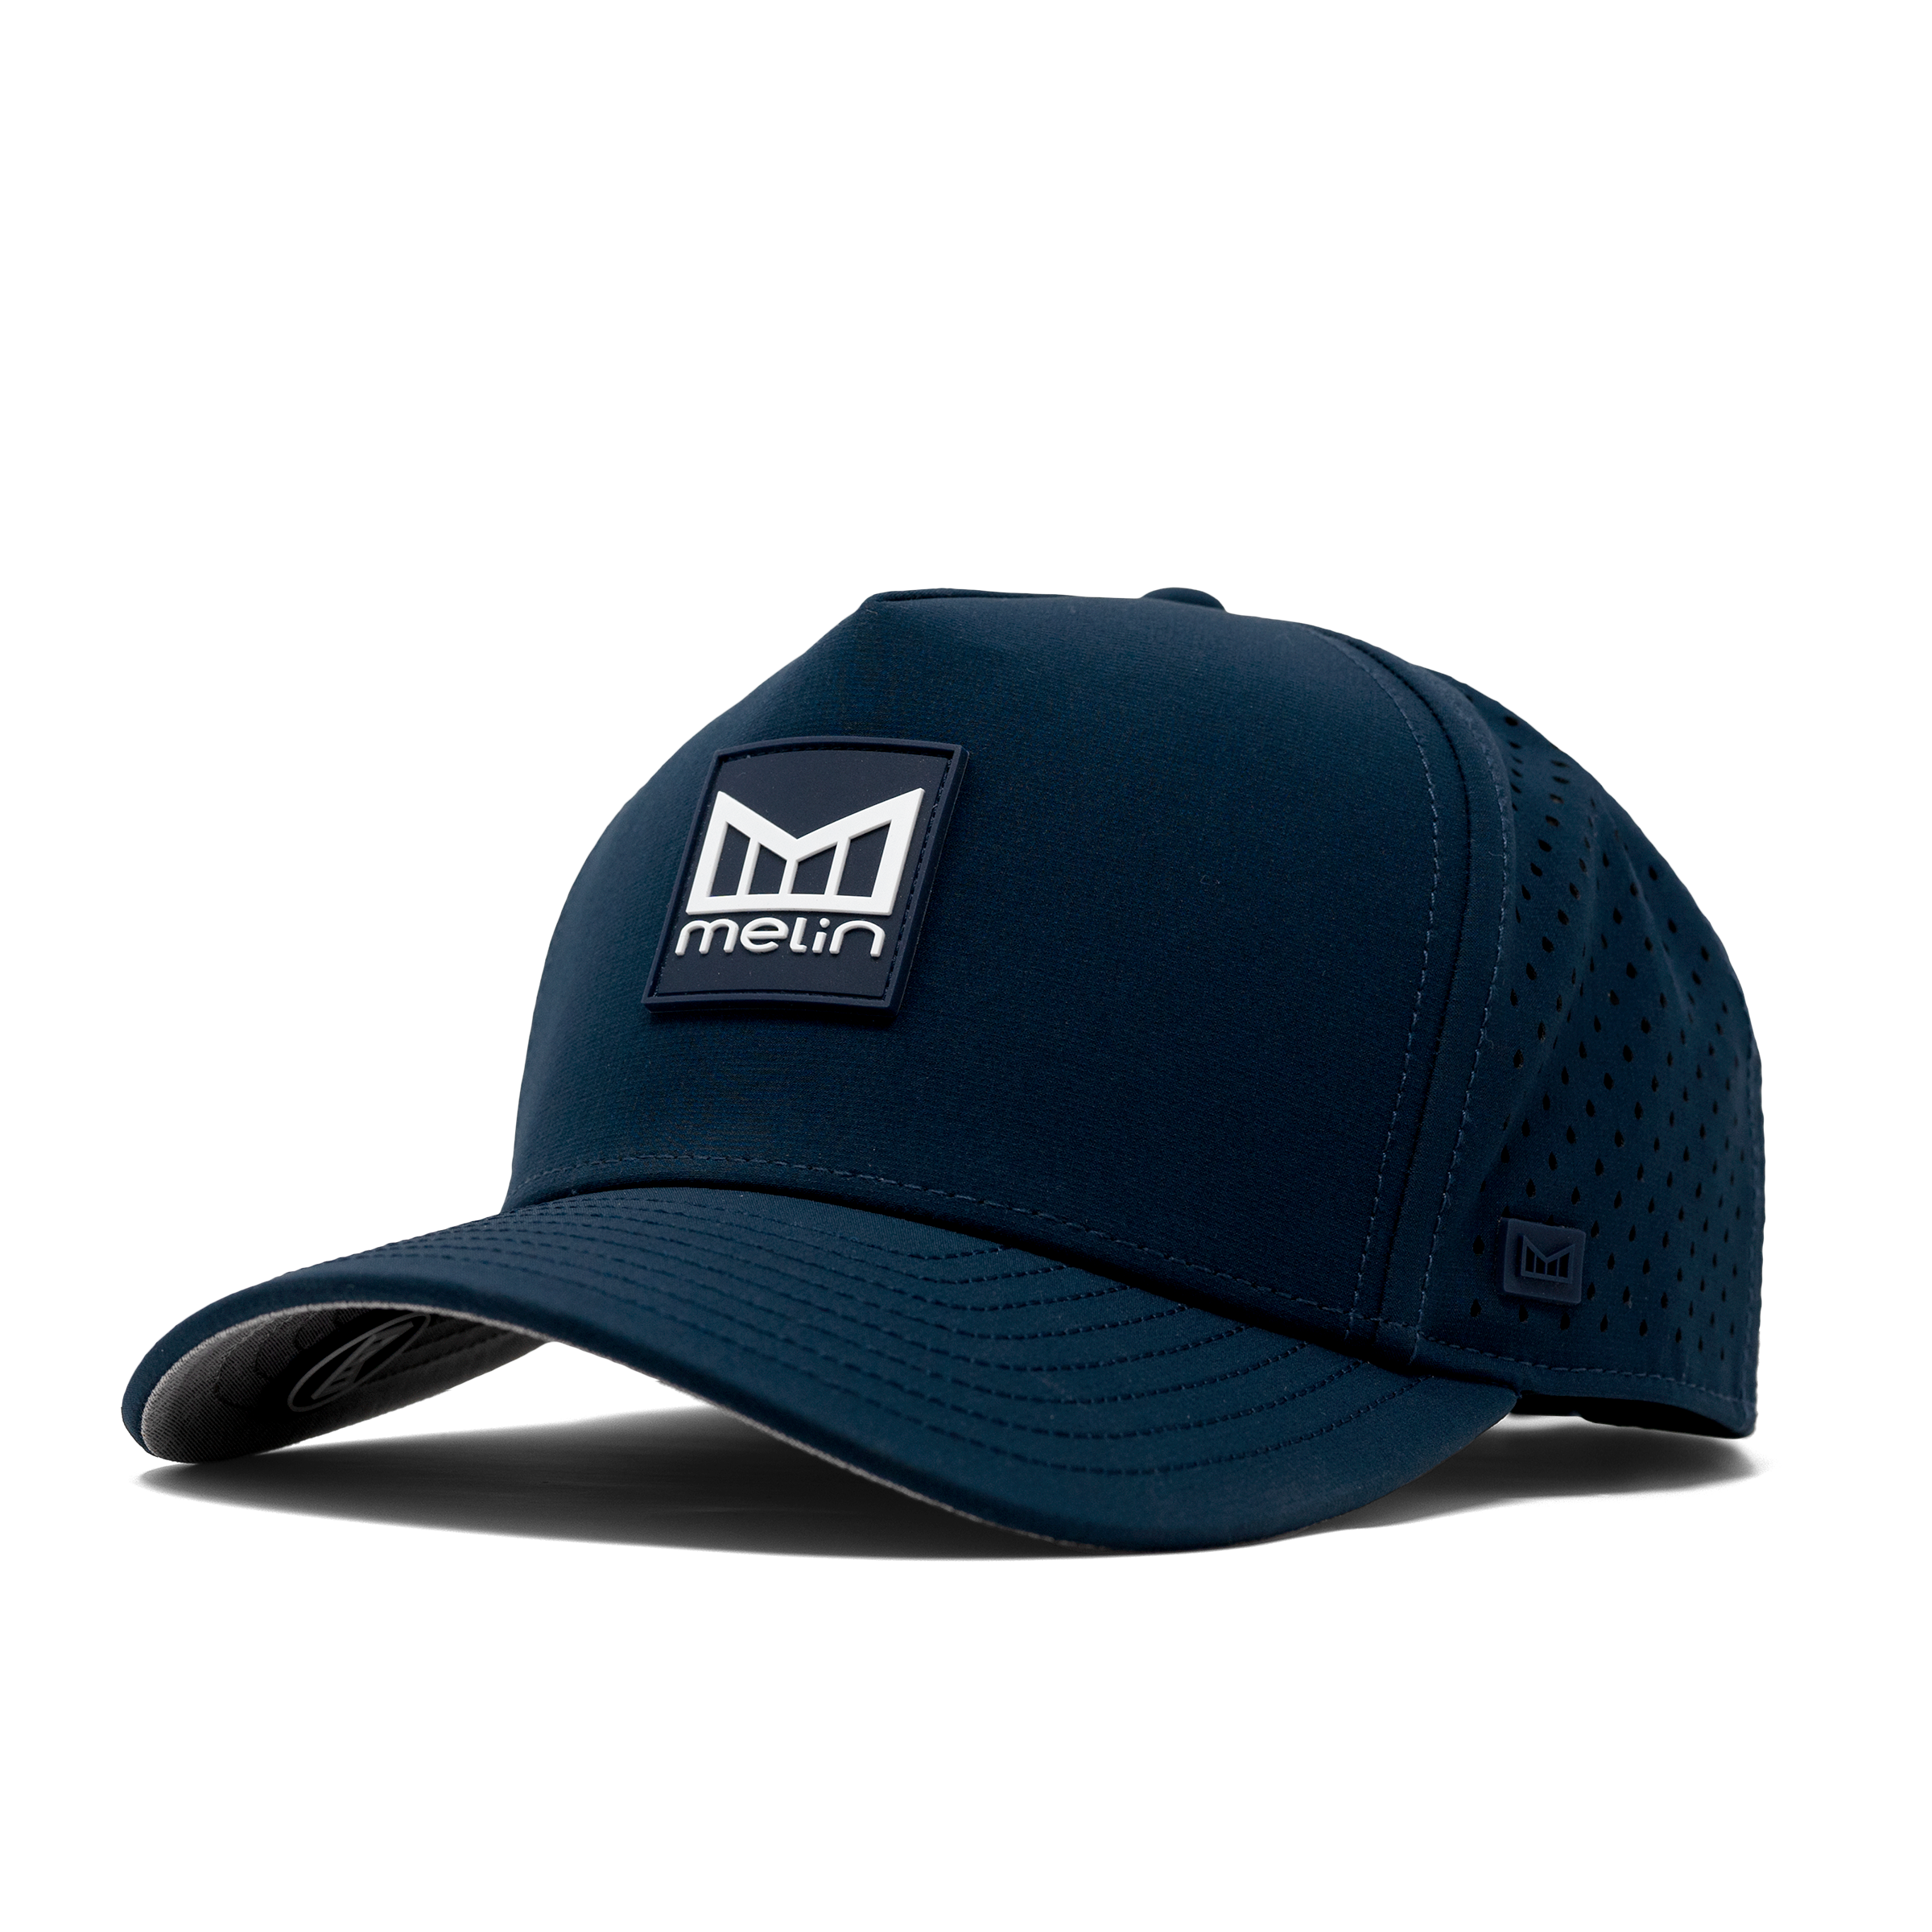 The angled front of melin's Odyssey Stacked Hydro hat in Navy